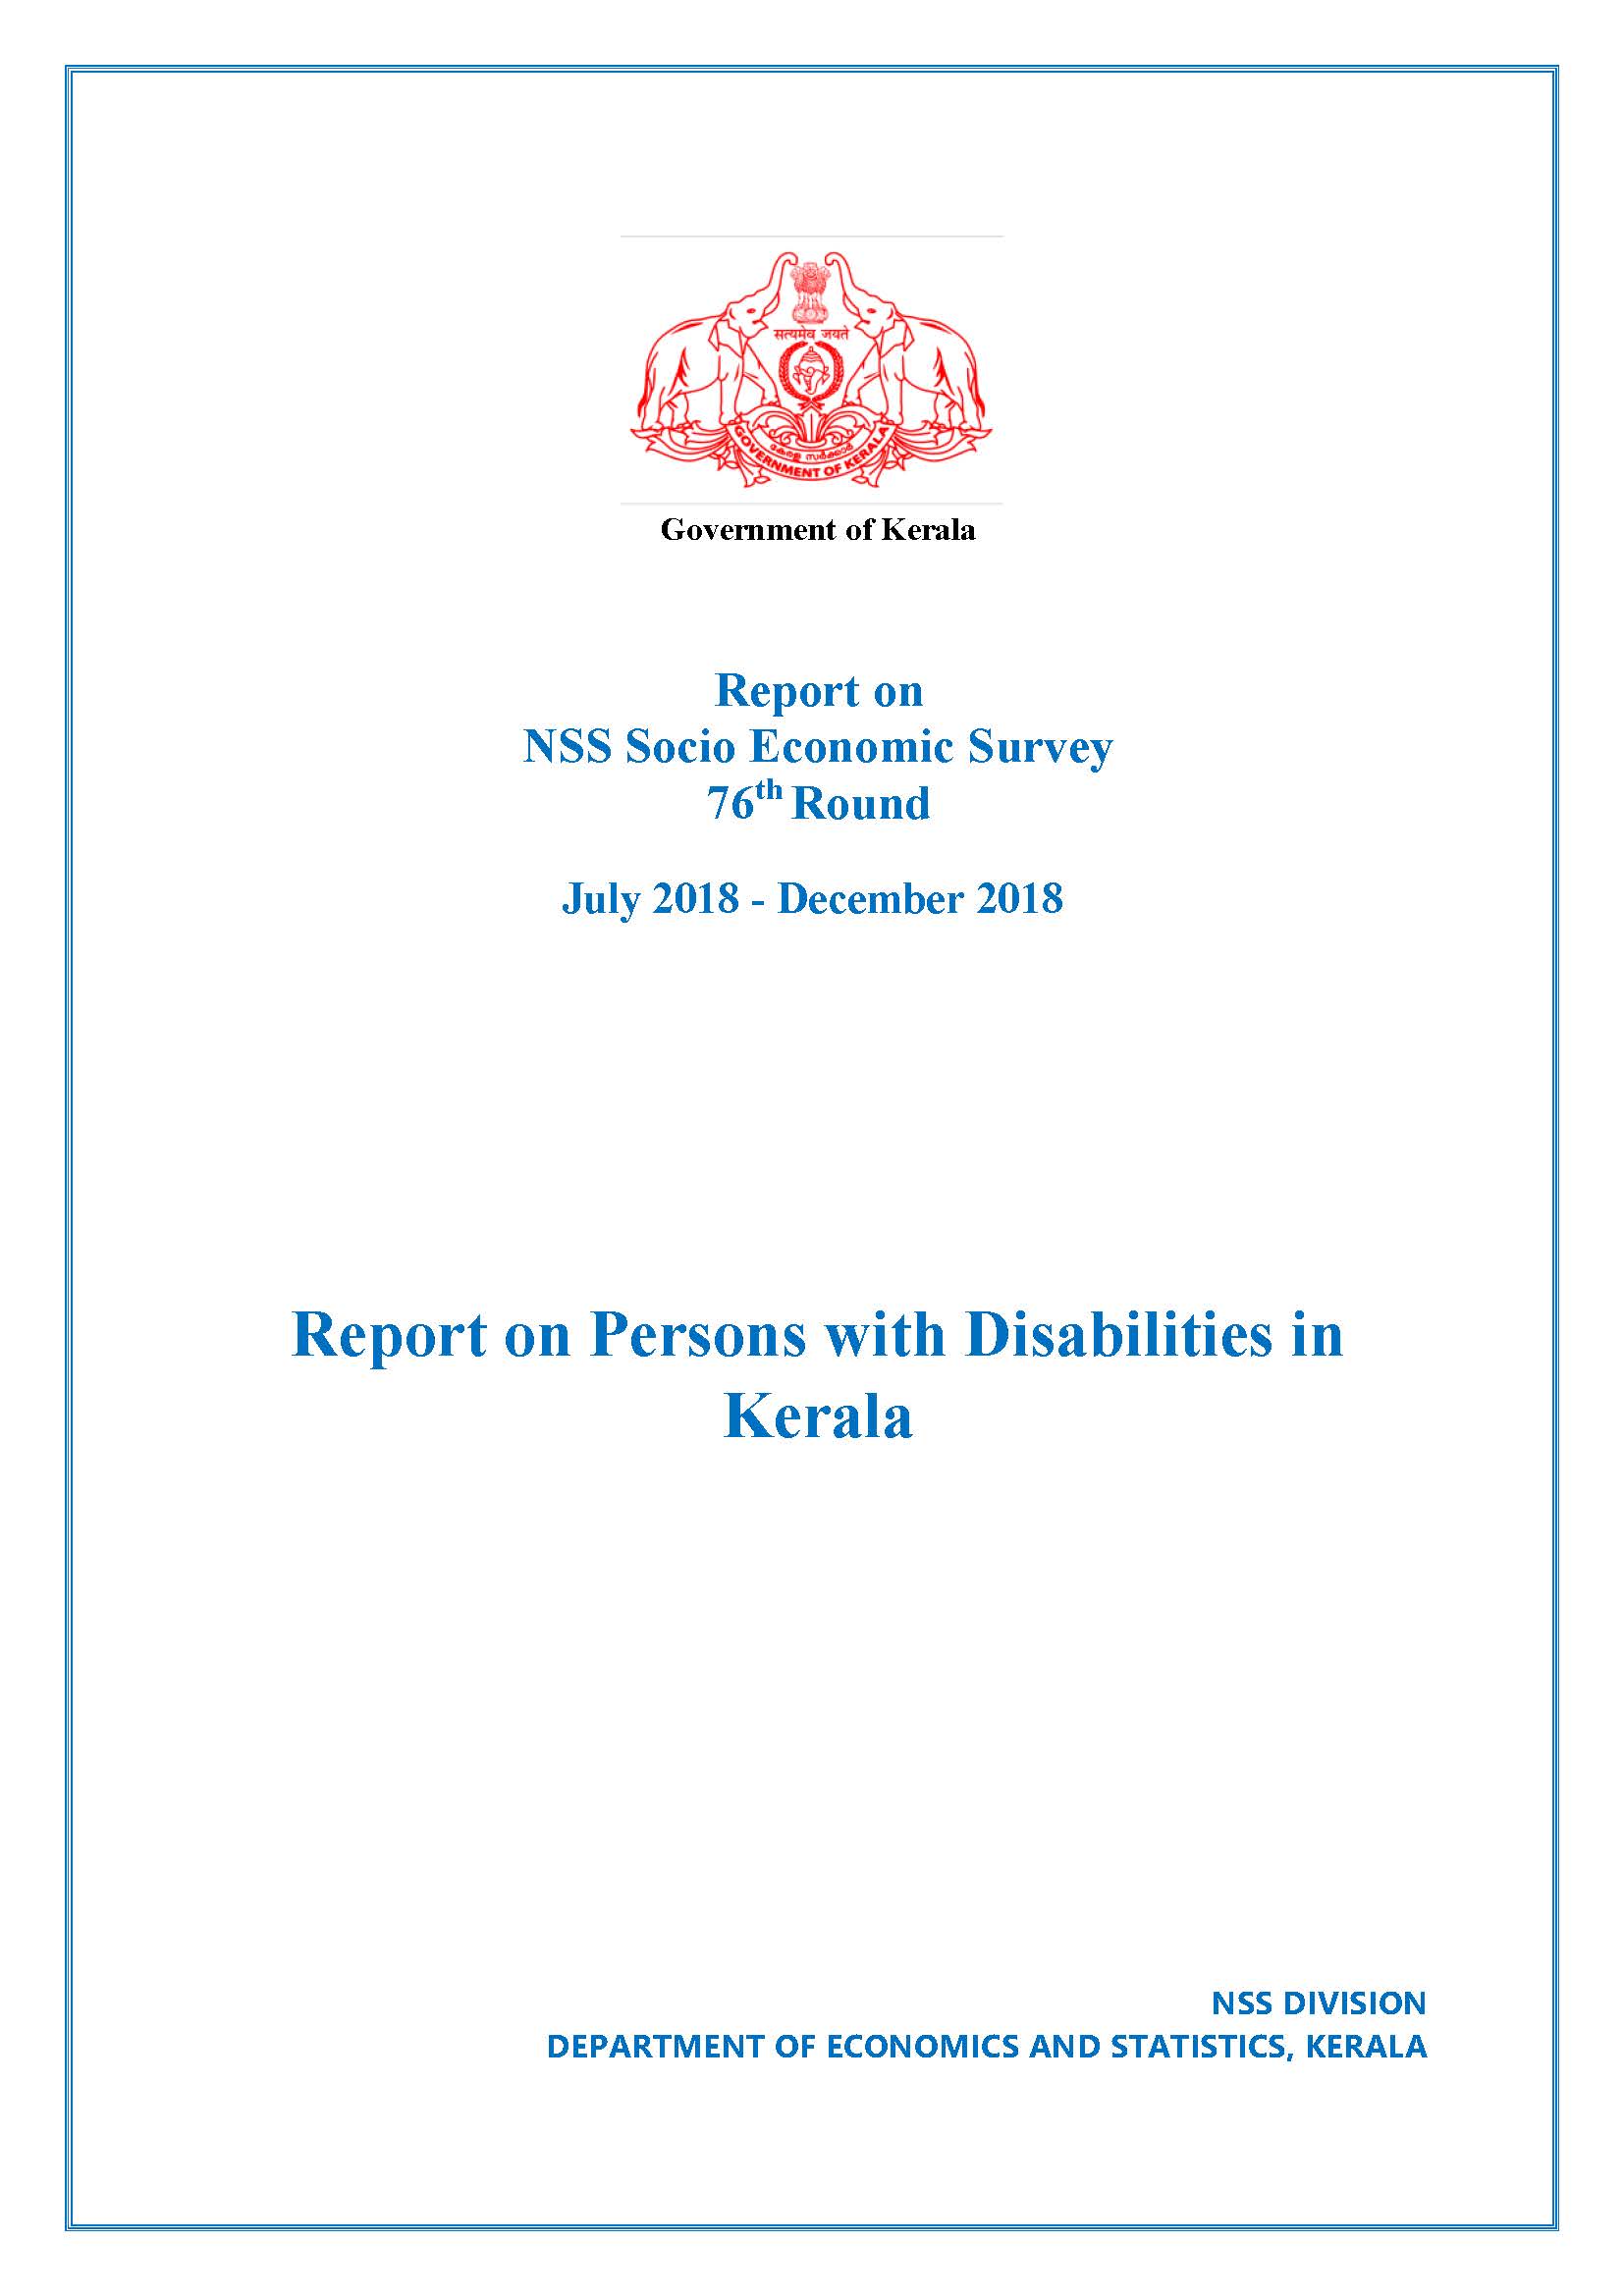 NSS 76th round -  Report on Persons with Disabilities in Kerala